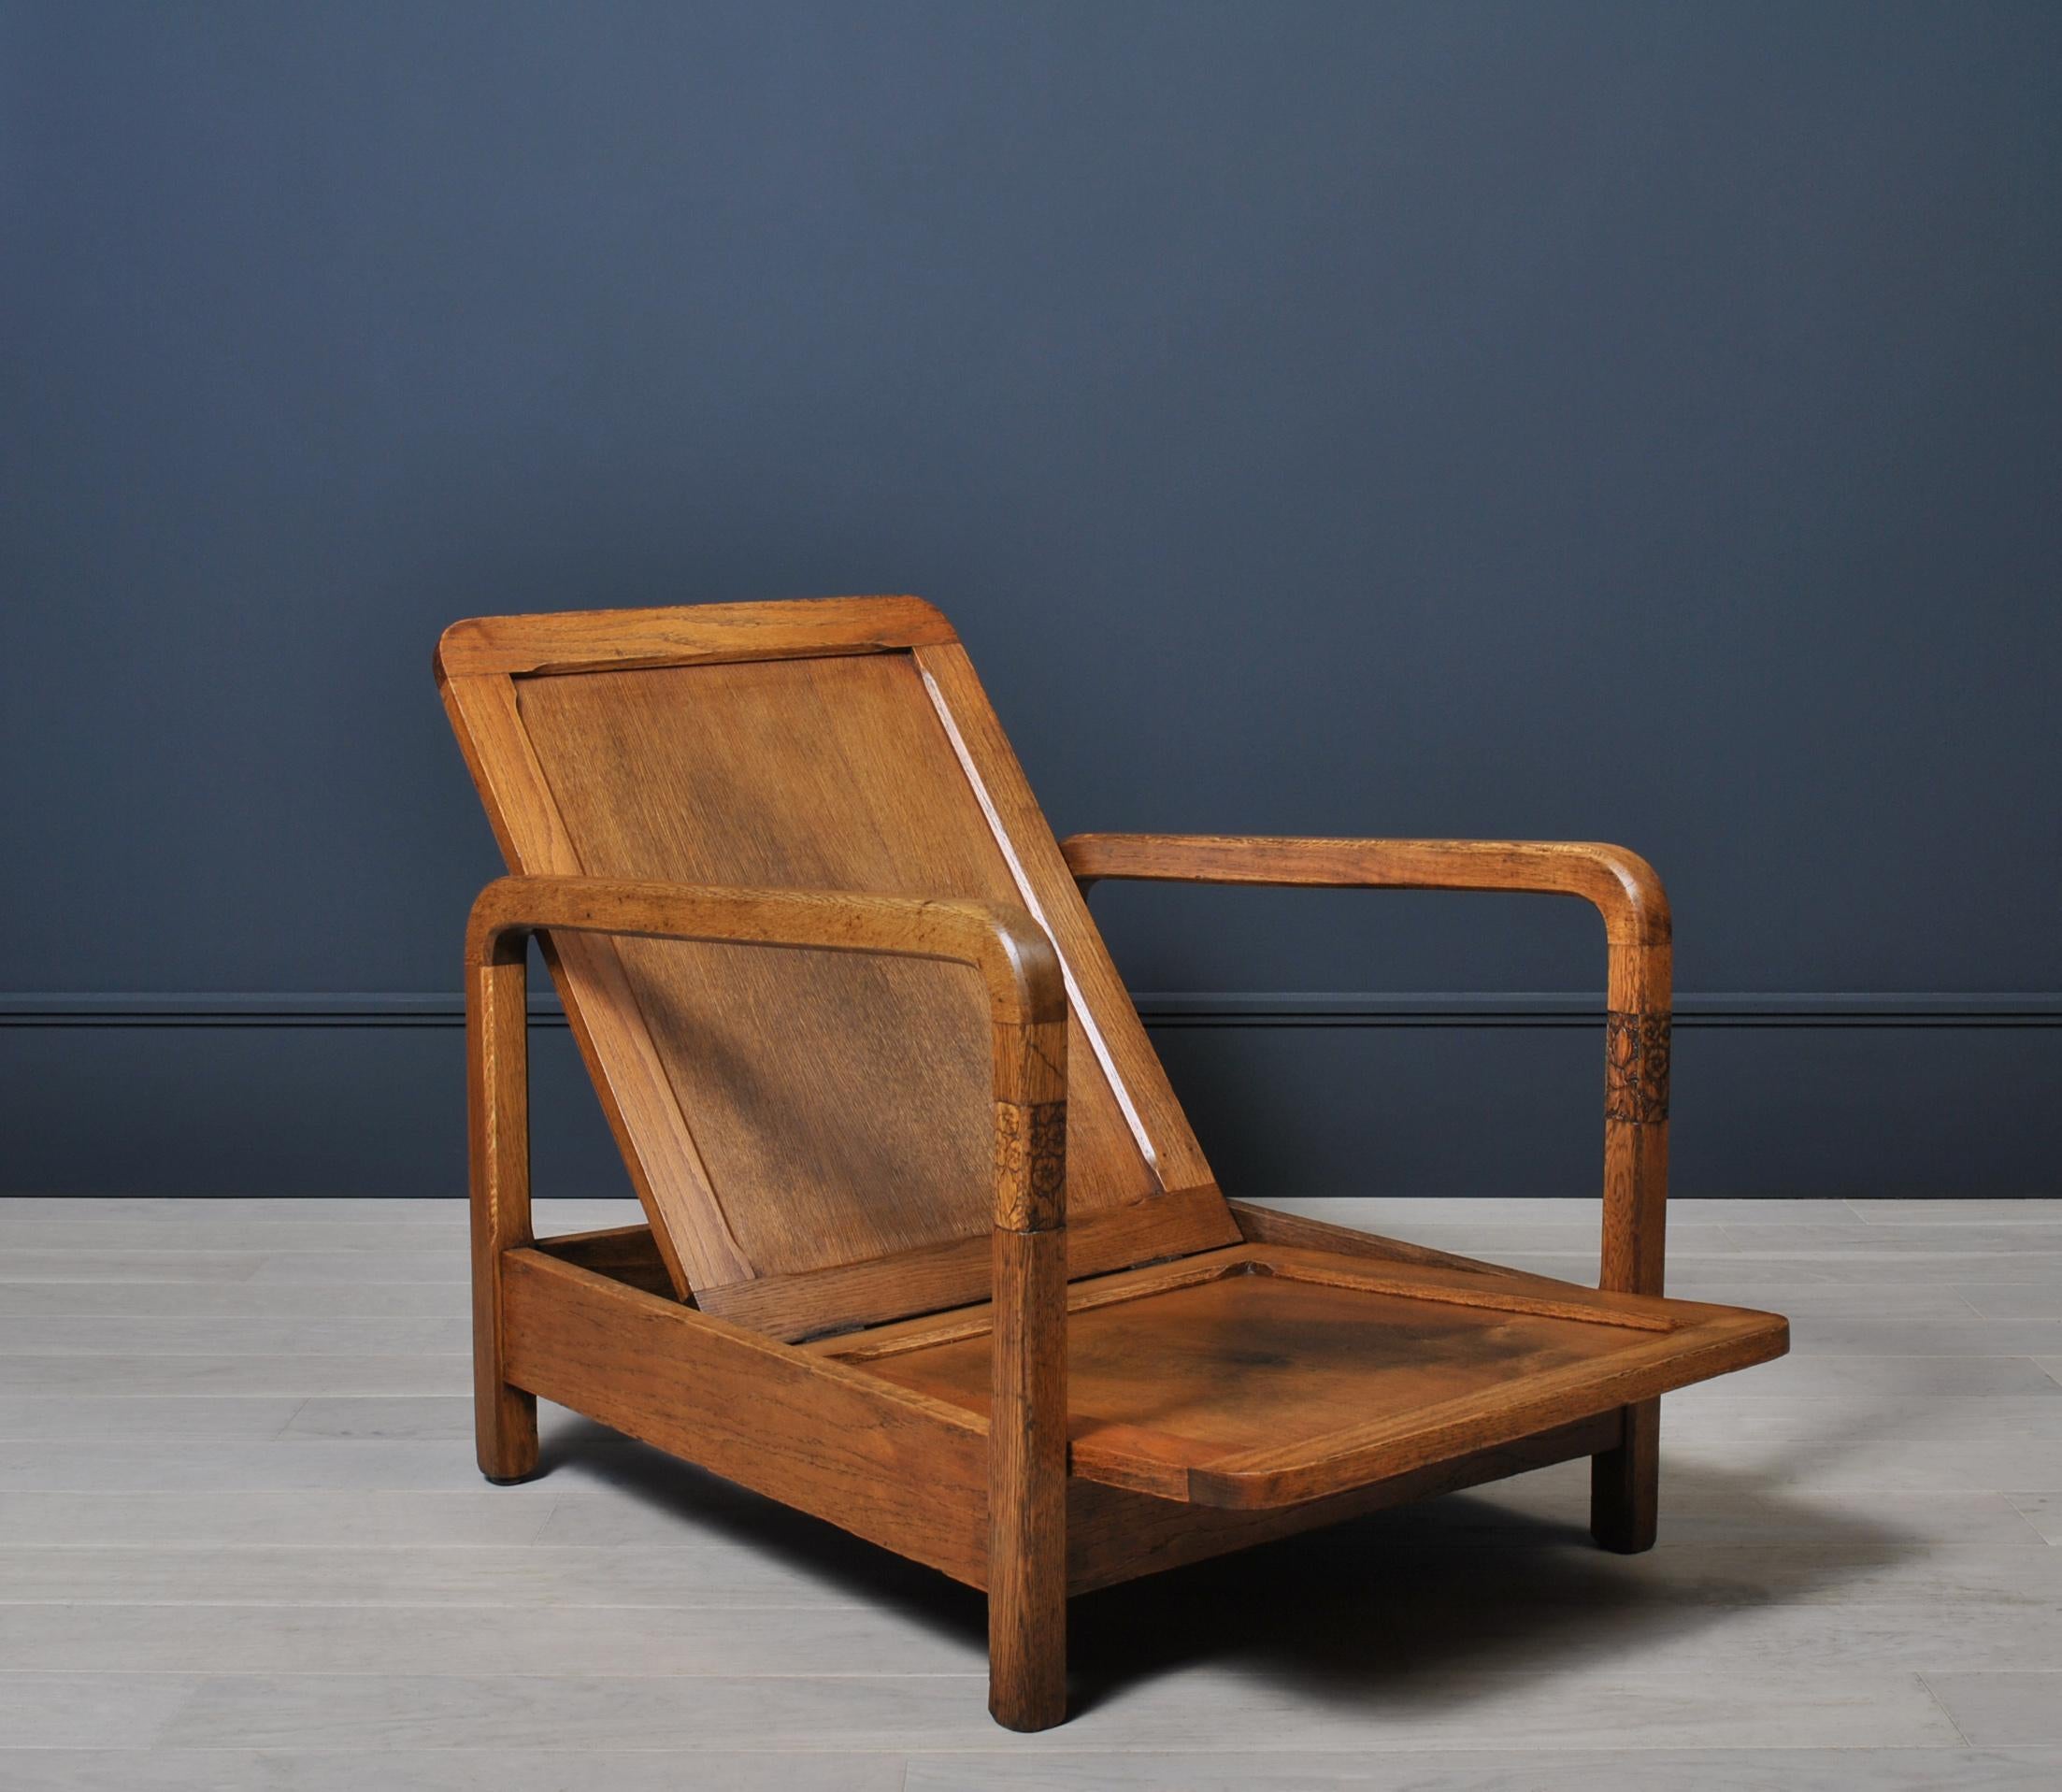 An early 20th century Art Deco Modernist chair. Circa 1920. Constructed from English Oak with beautiful little carved flower detail to the arm uprights. An extremely unusual and striking low profile chair. 
Please note that it is shown and sold